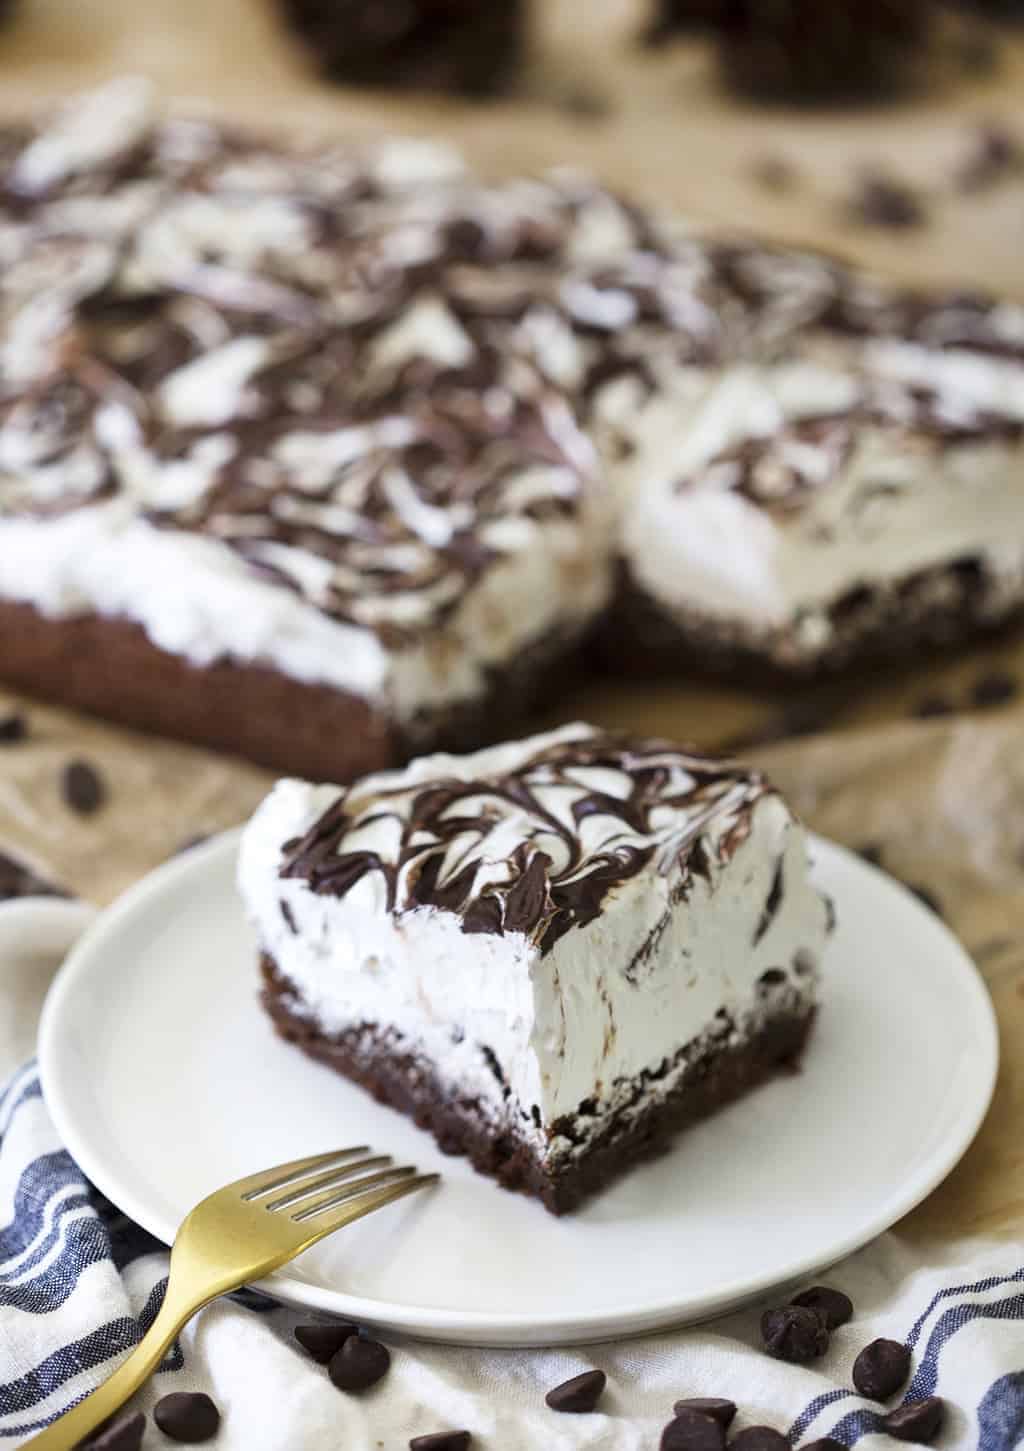 A photo of a Marshmallow Brownie on a plate.